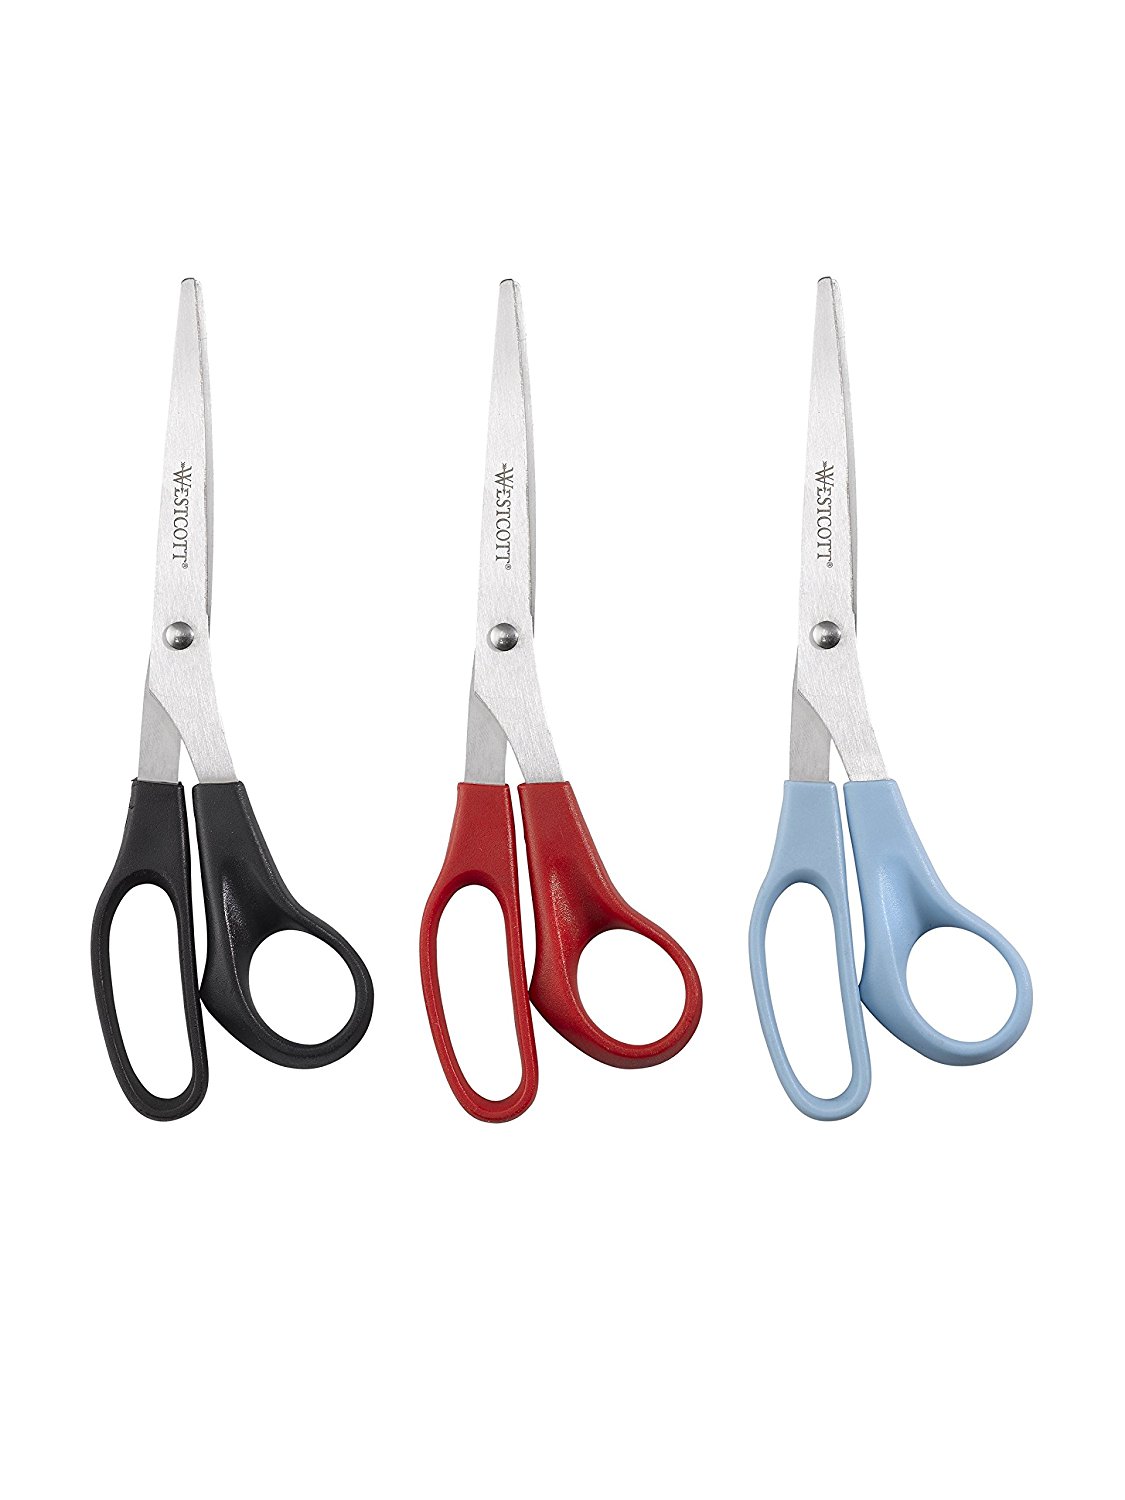 Westcott All Purpose Value Scissors, 8", Straight, 3-Pack, Assorted Colors - image 1 of 8